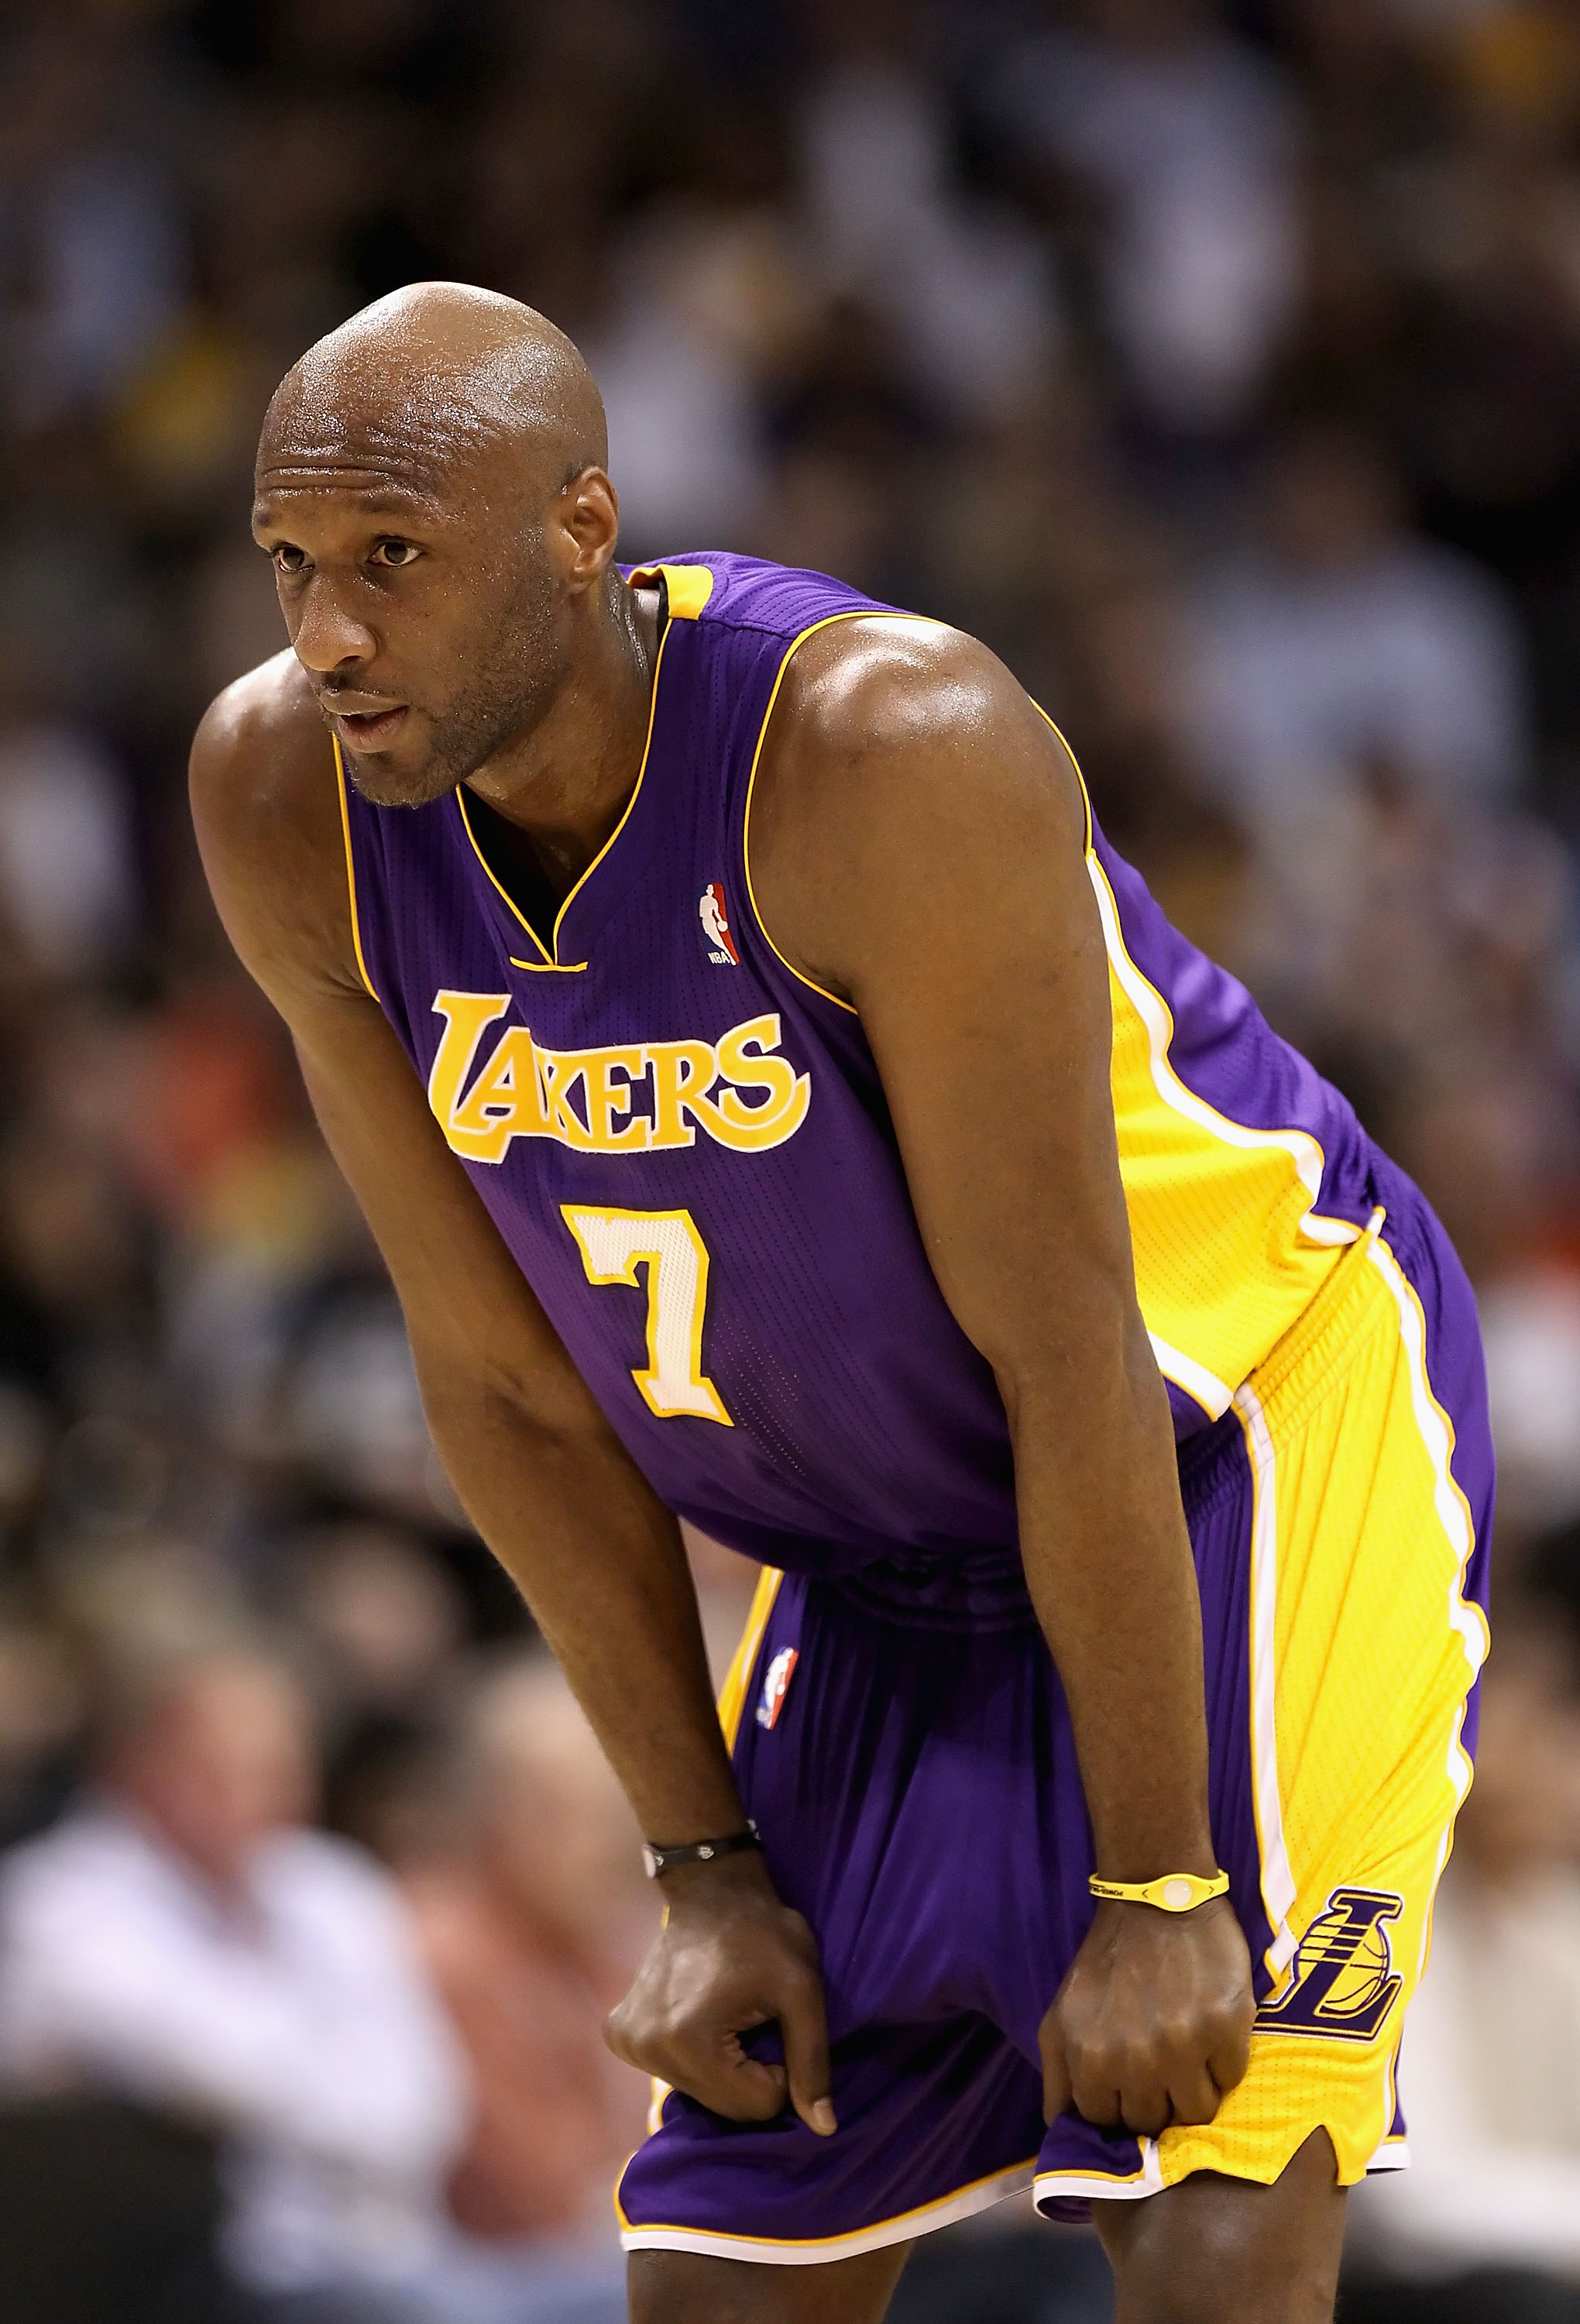 With Odom, the Lakers have a reason to look up.